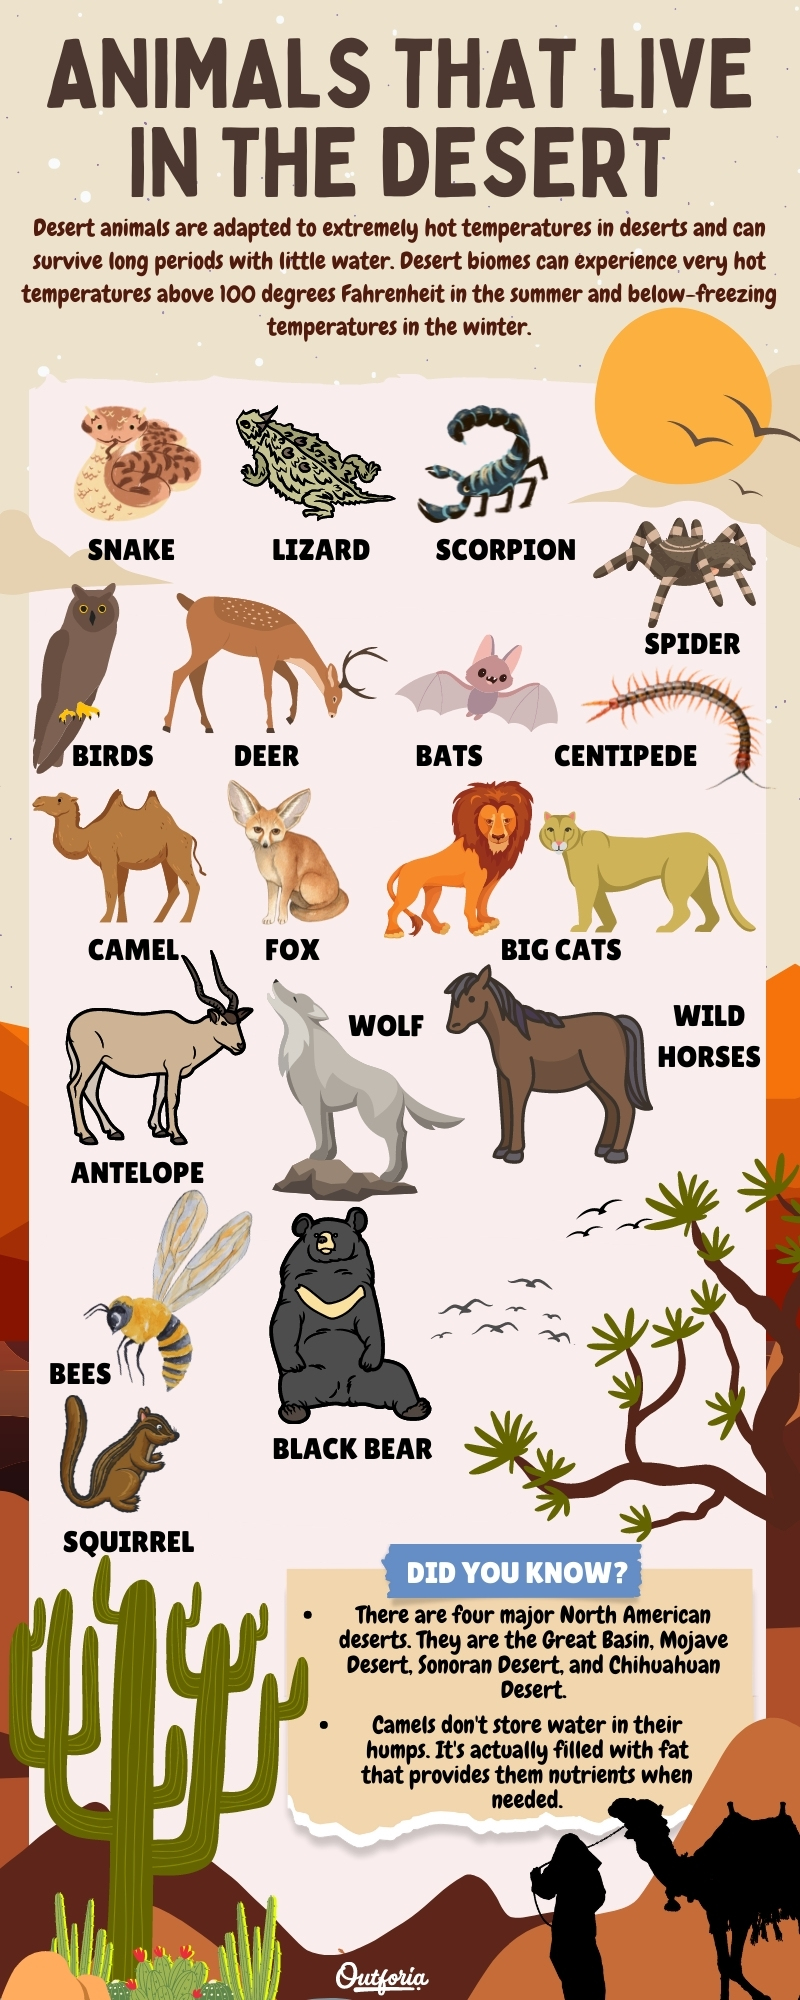 22 Animals That Live in the Desert: How Do They Adapt? - Outforia